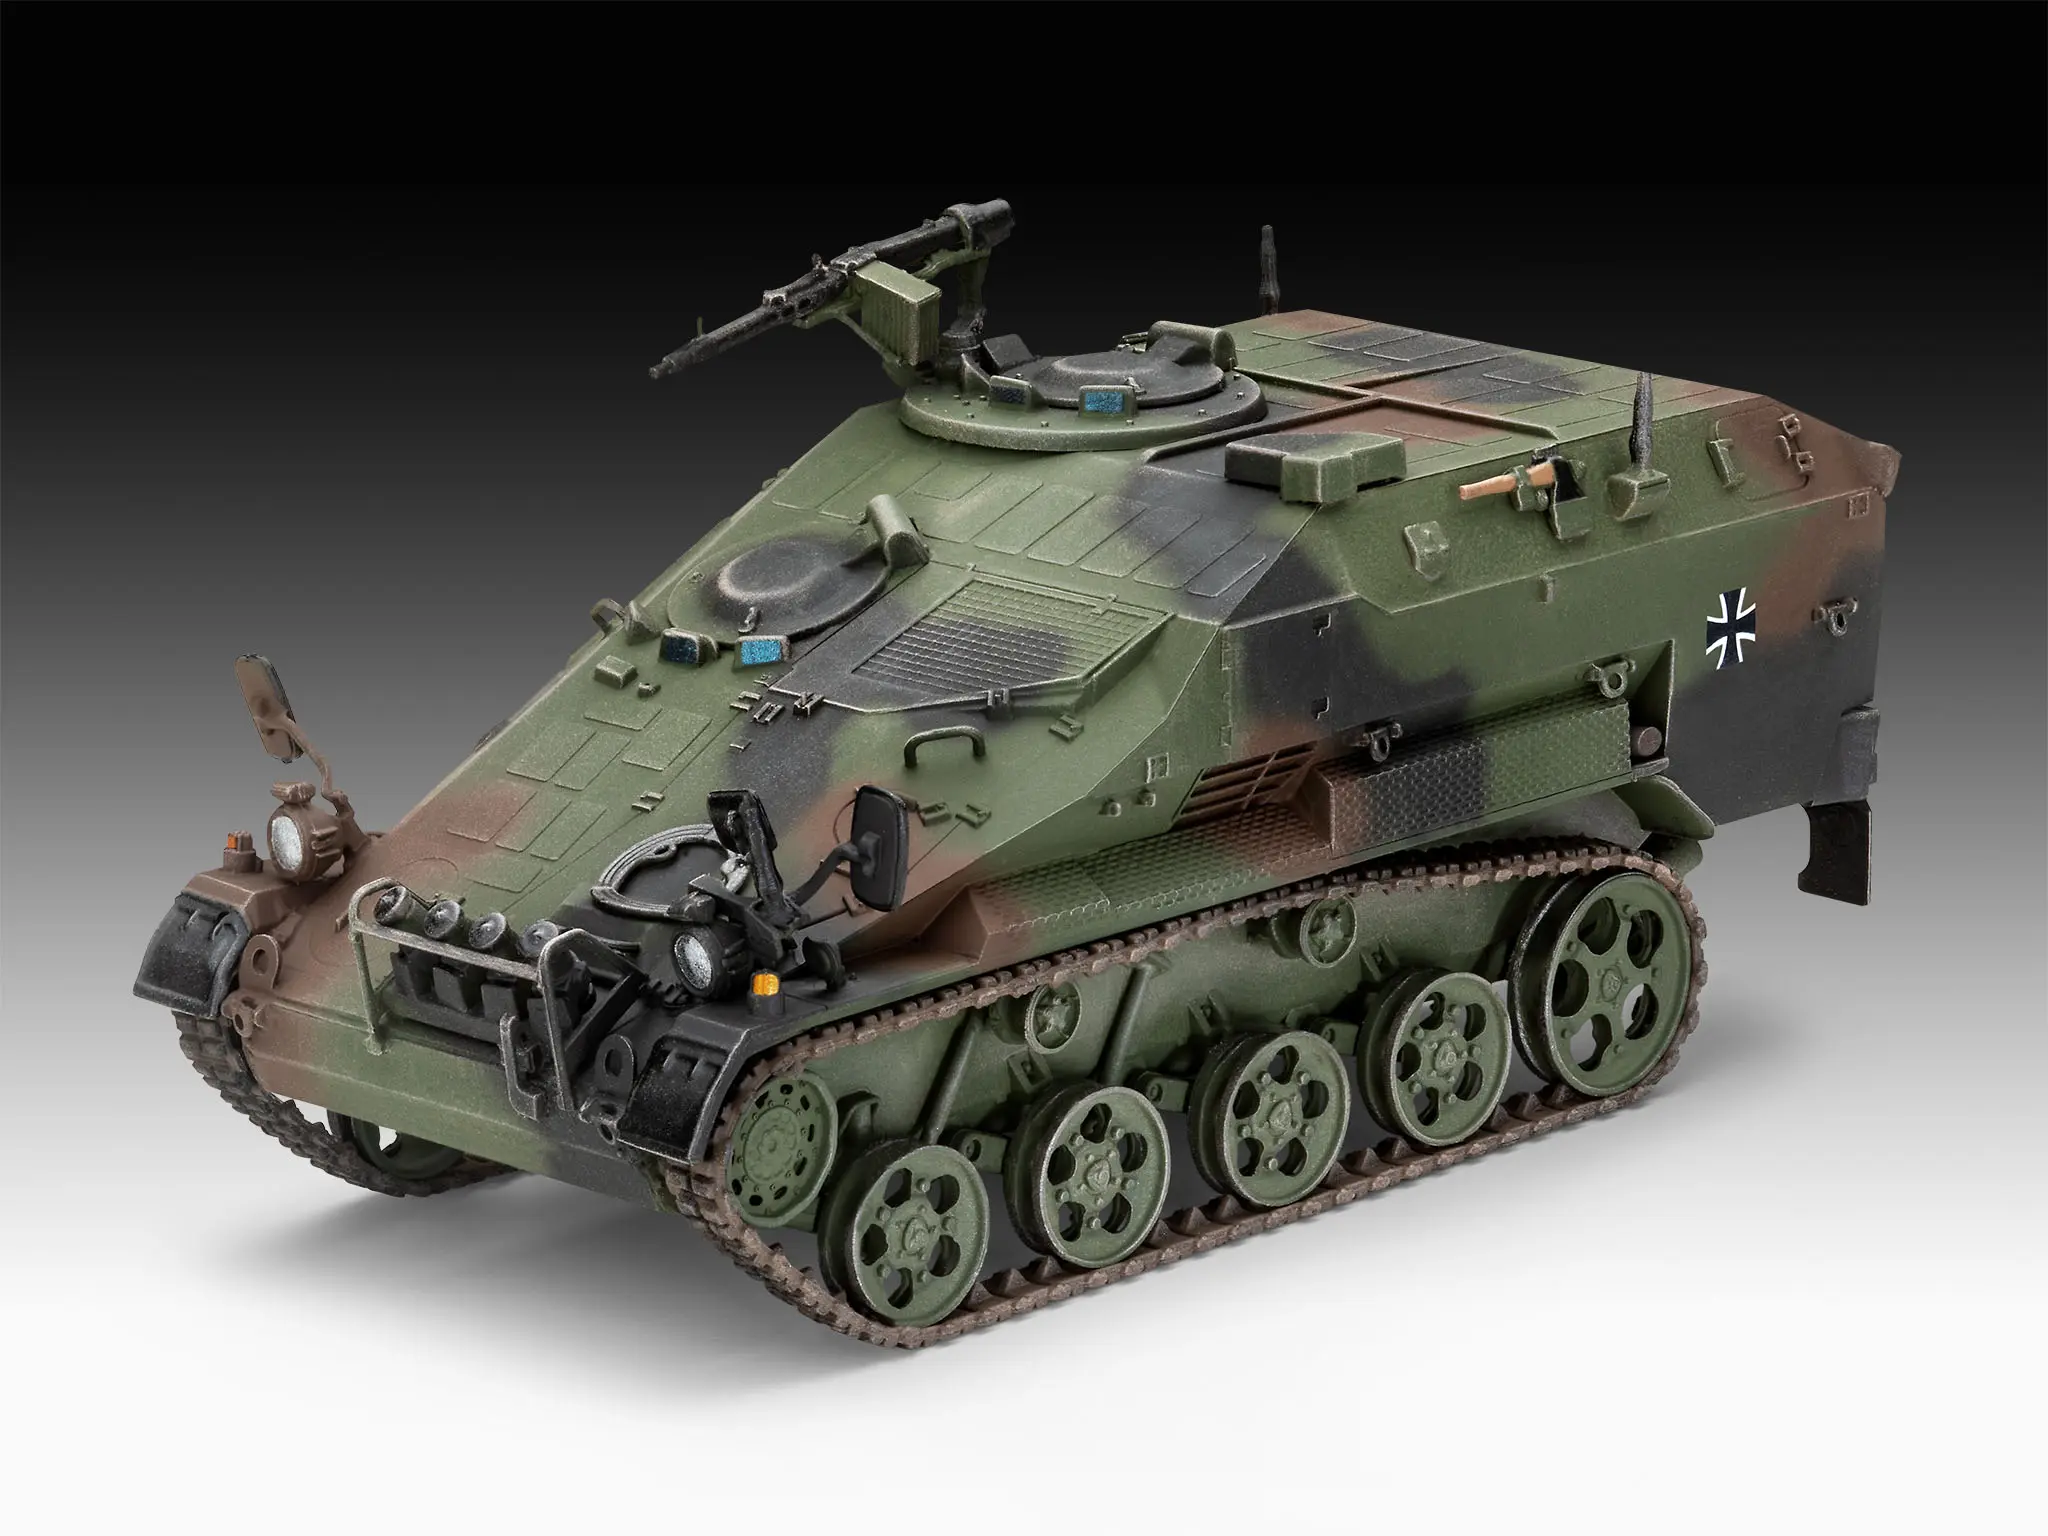 Revell 03336 - Wiesel 2 LeFlaSys BF/UF